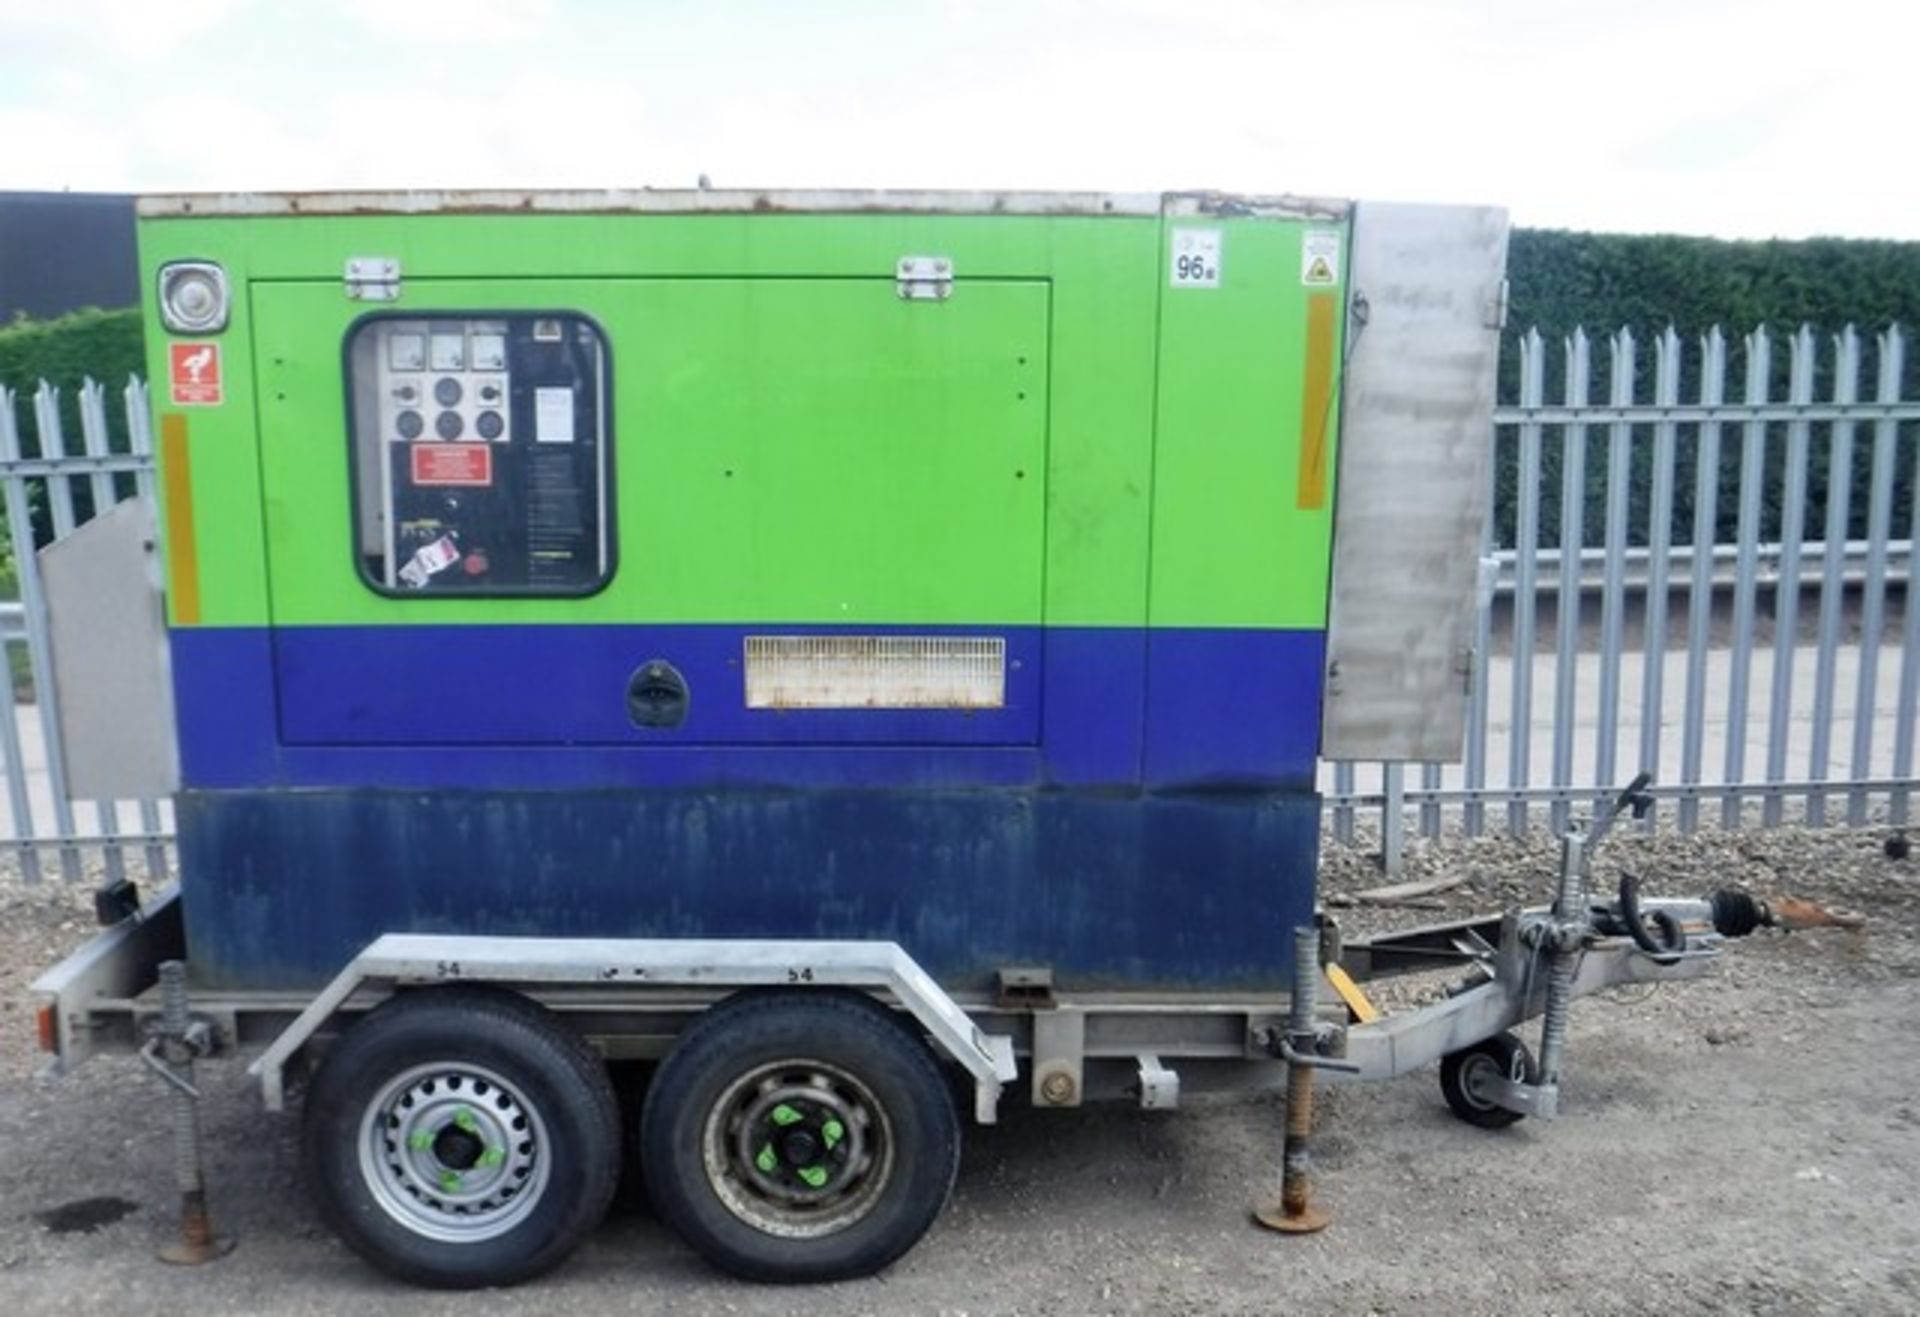 2002 LCH P60P1 Generator, 60kva. S/N FGWPEPO3CD0A05757. Mounted on RM twin axle trailer. S/N 020525.